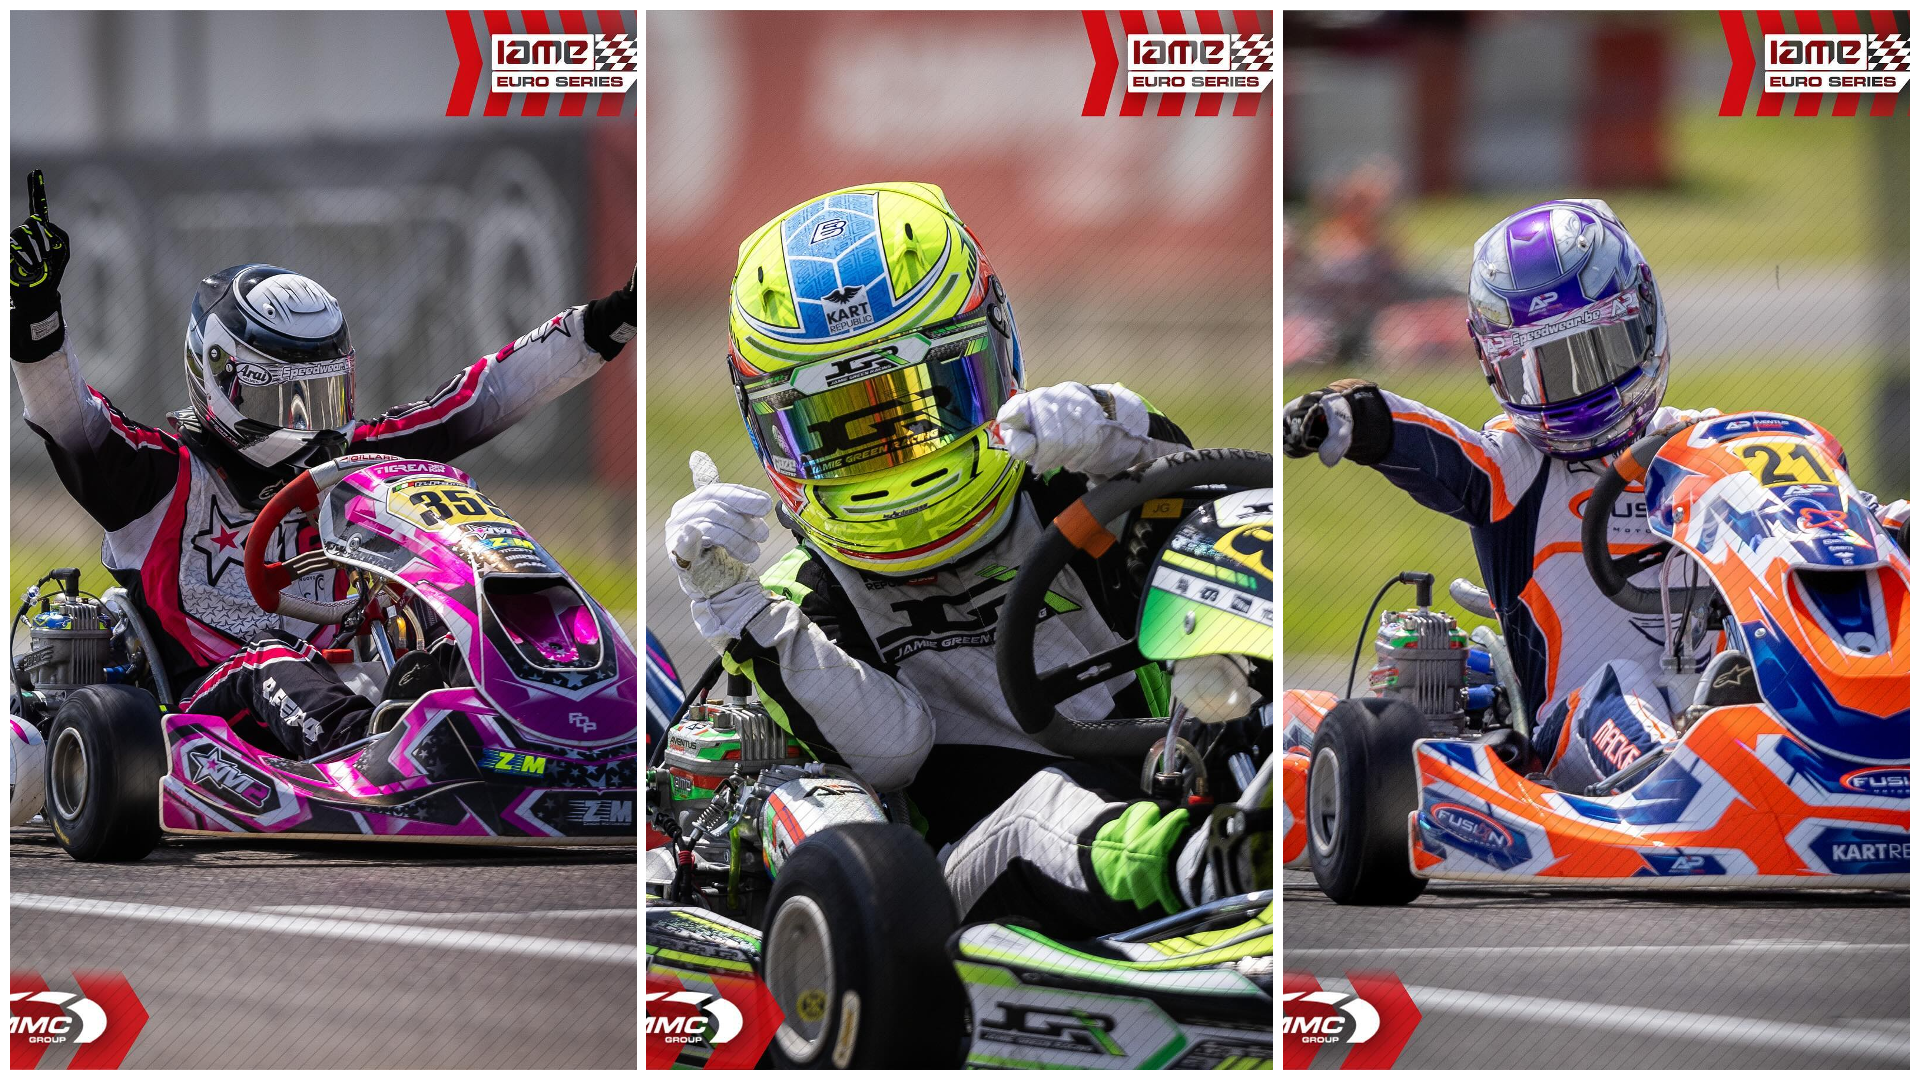 IAME Euro Series: Round 02 Results from Franciacorta Karting Track